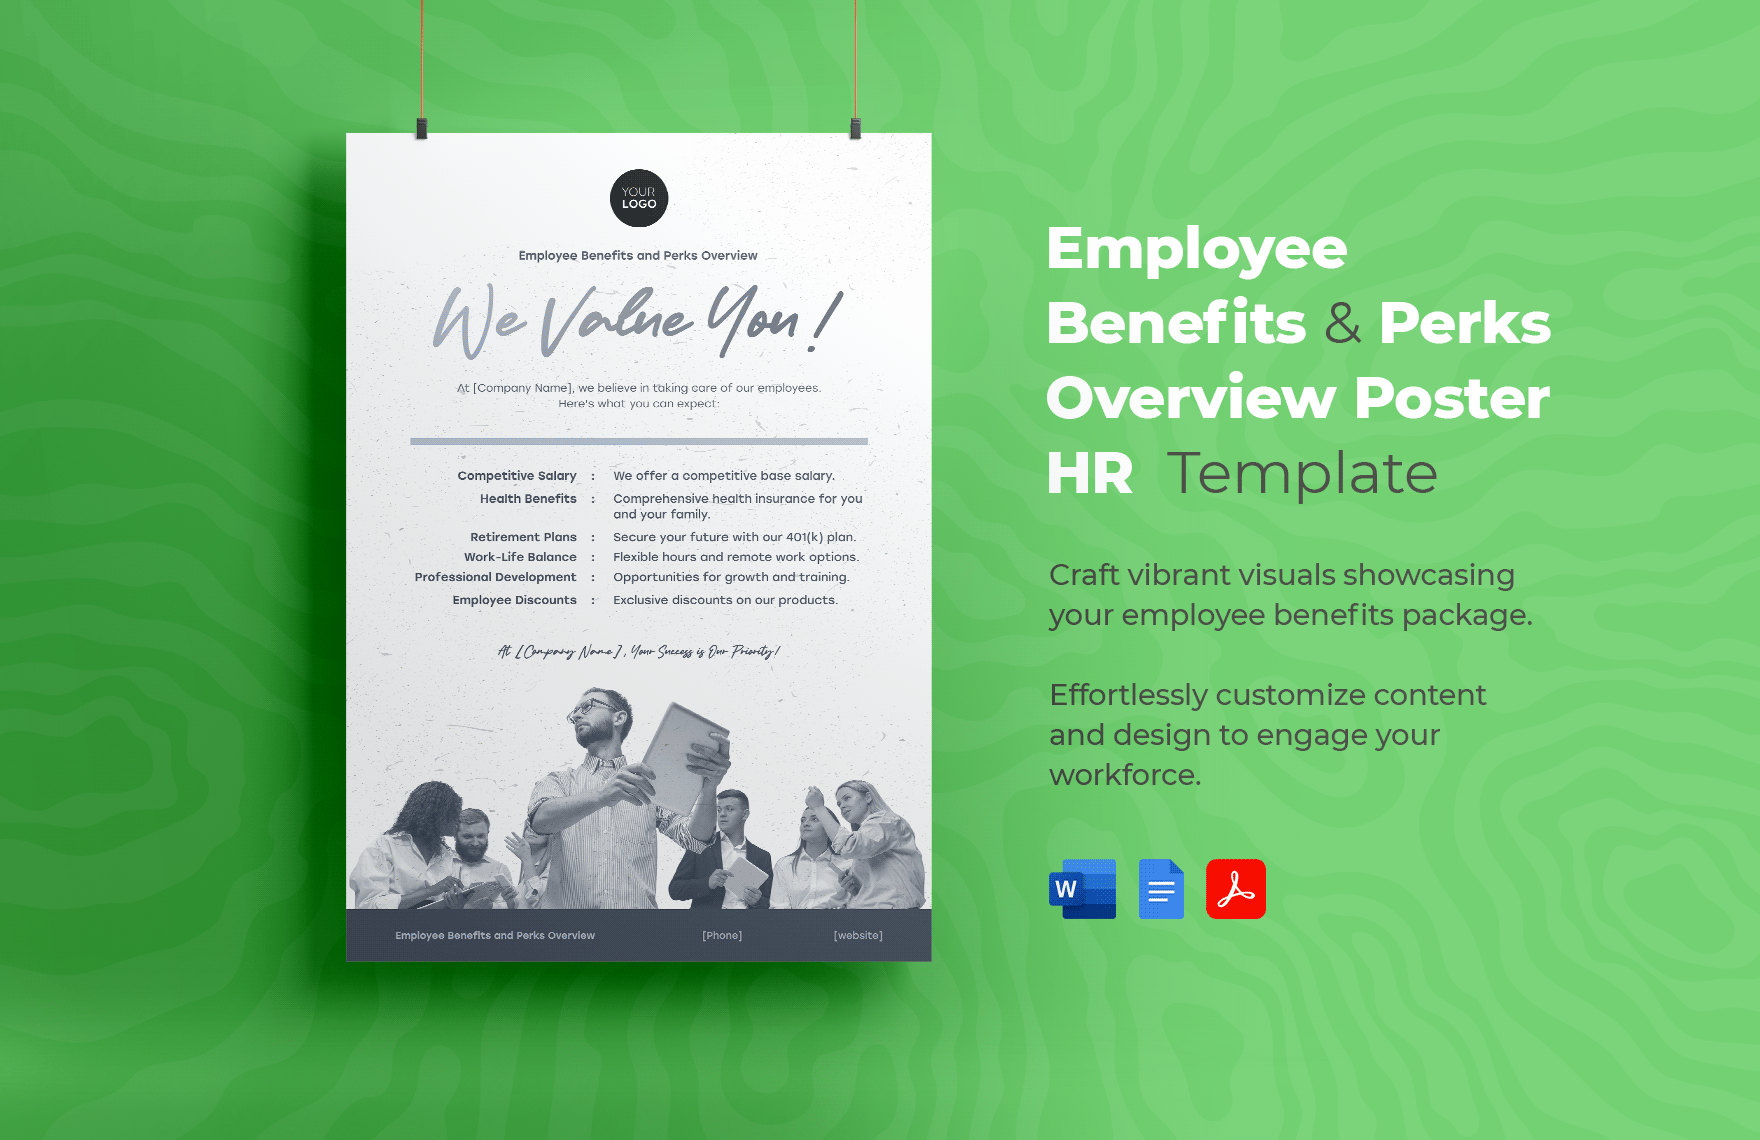 Employee Benefits and Perks Overview Poster HR Template